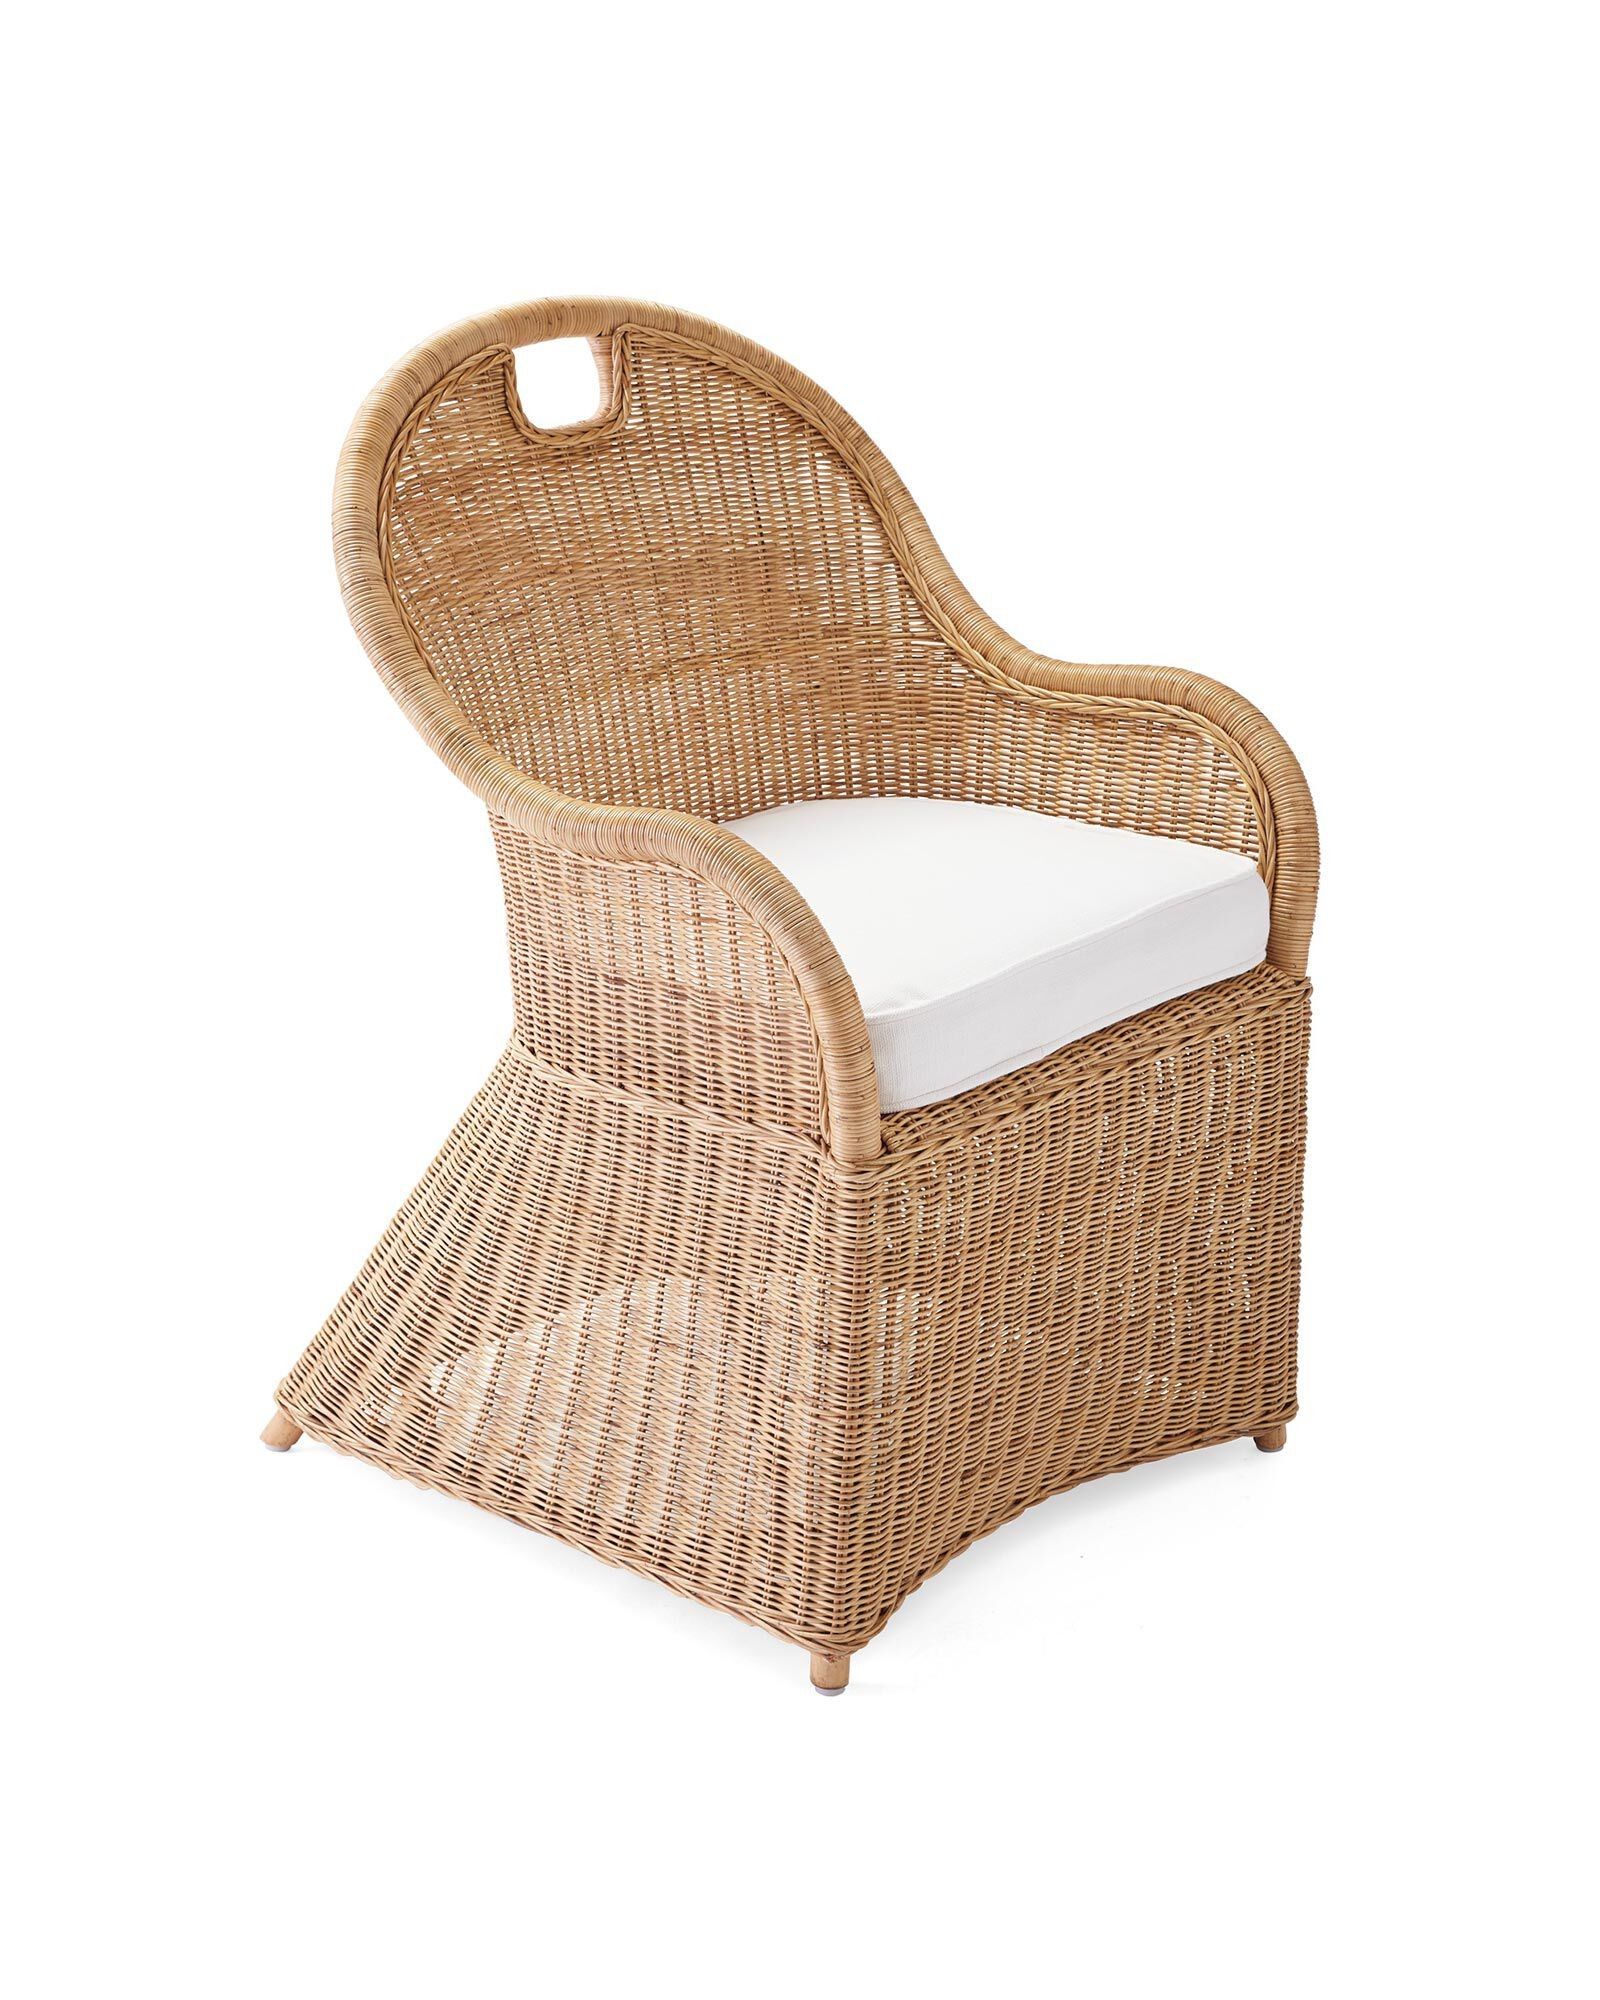 Shore Dining Chair- Rattan Chairs | Serena and Lily